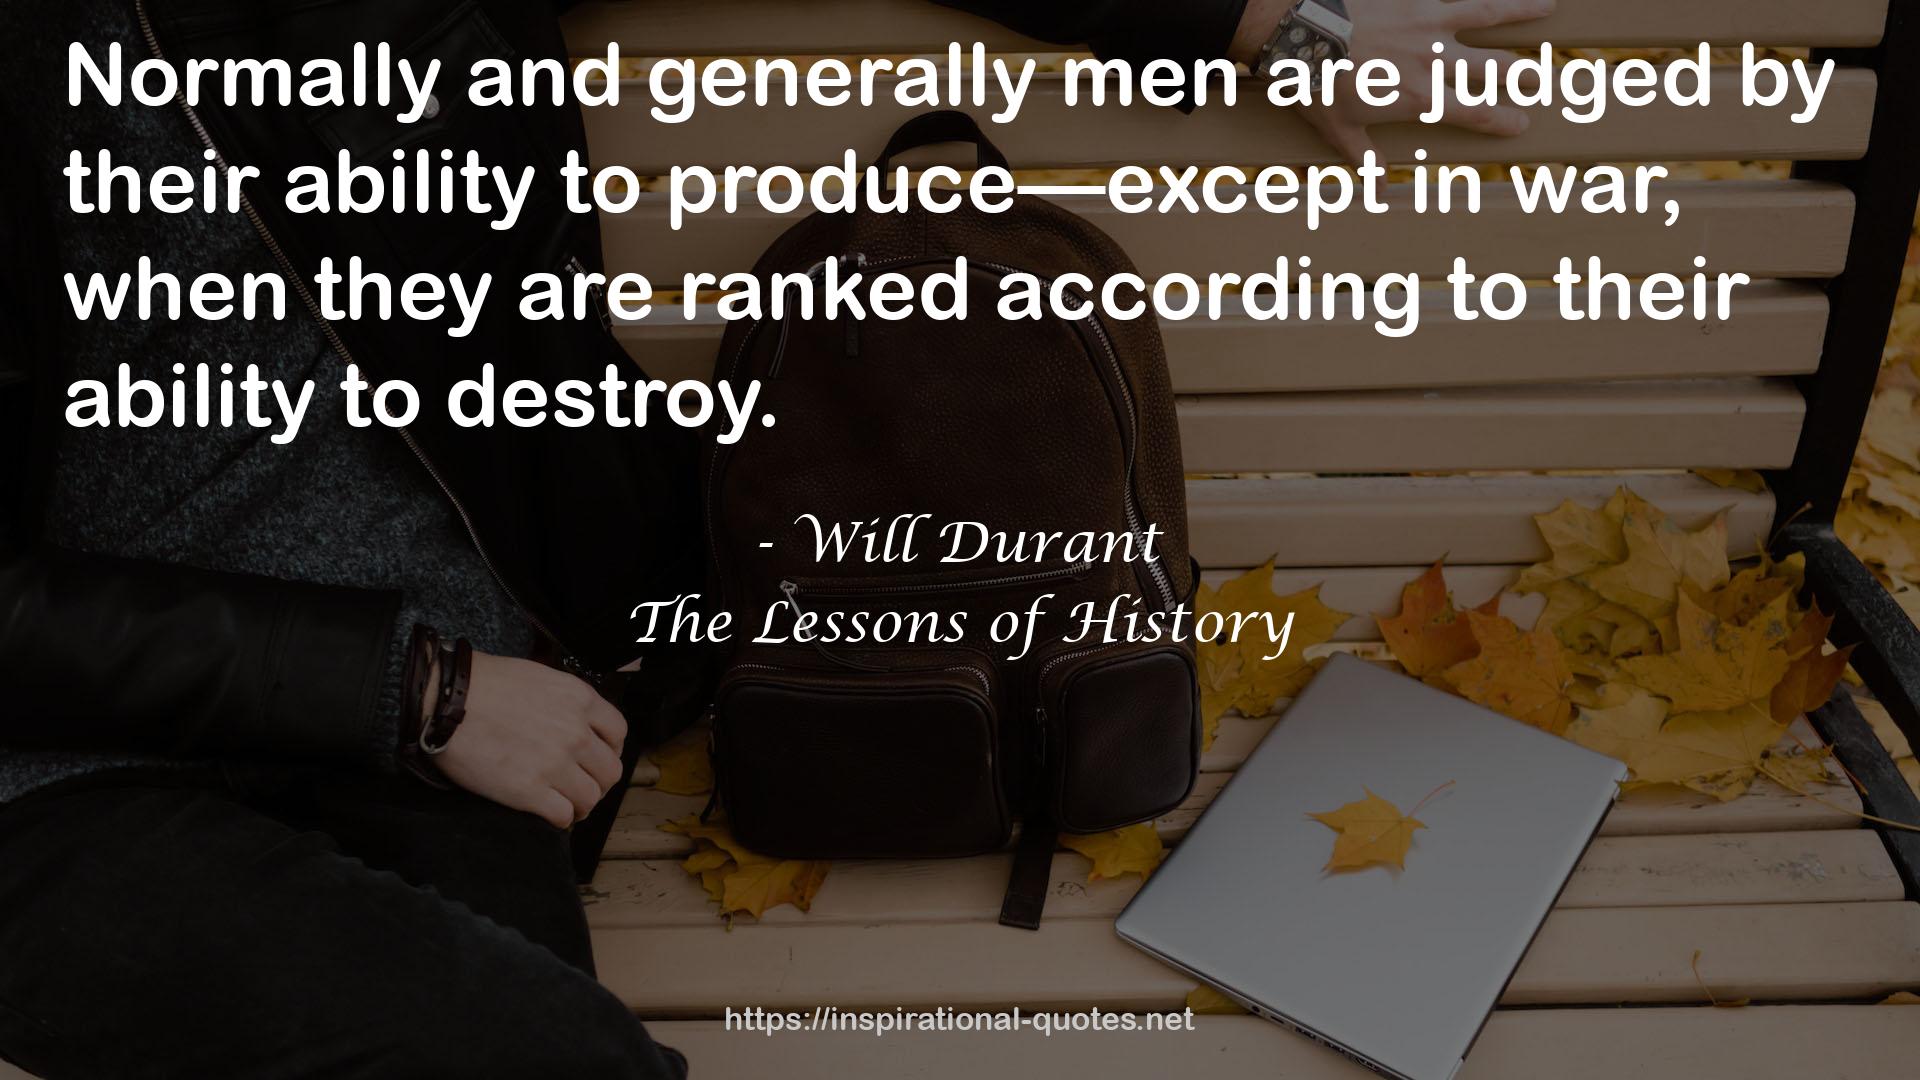 Will Durant QUOTES